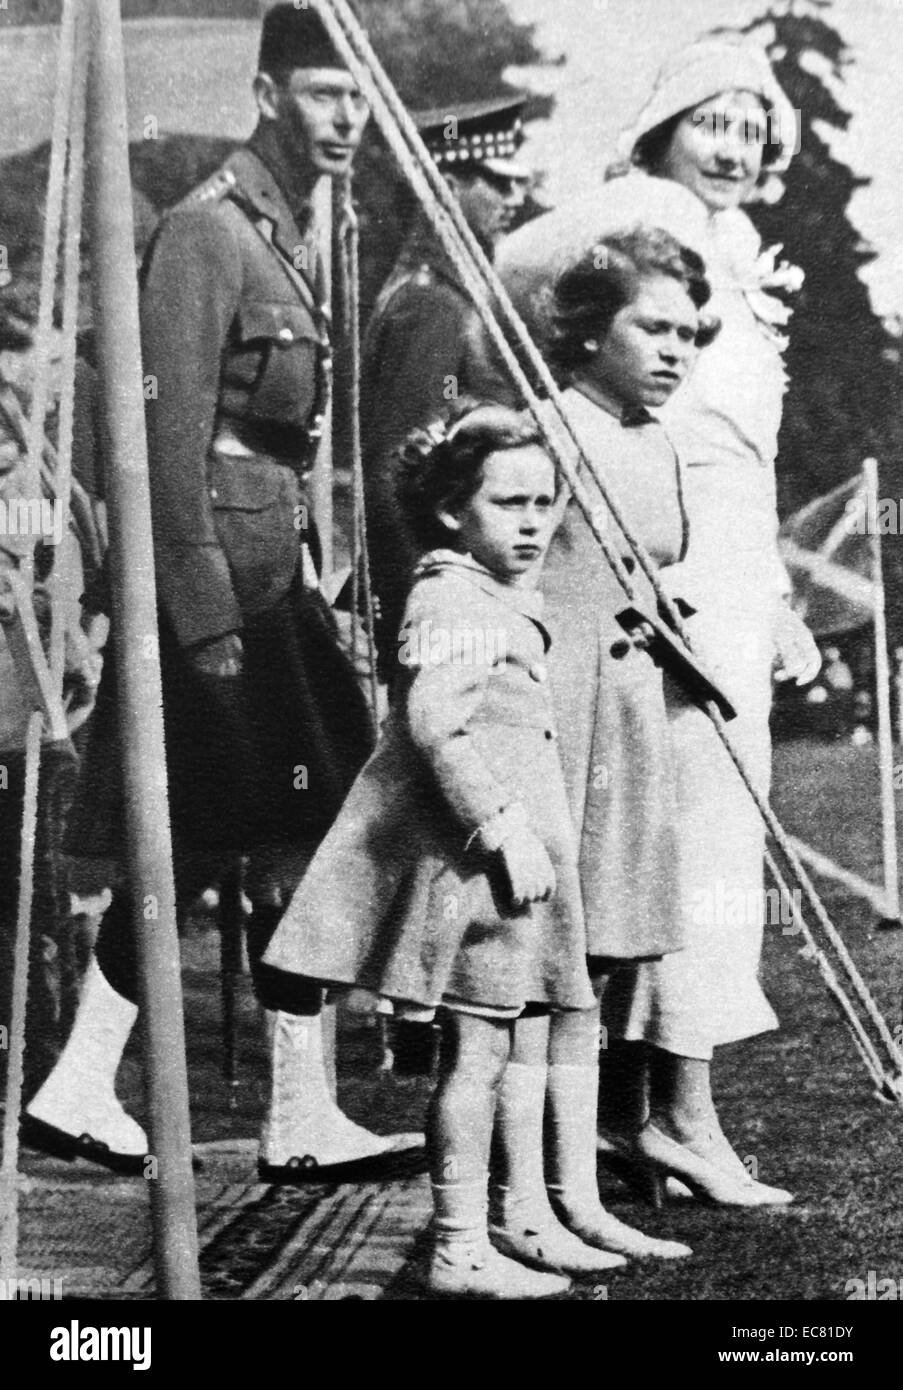 The Duke and Duchess of York (later King George VI and Queen Elizabeth) together with their daughter Princess Elizabeth and Princess Margret at the Highland games at Braemar, Scotland in 1934. Stock Photo